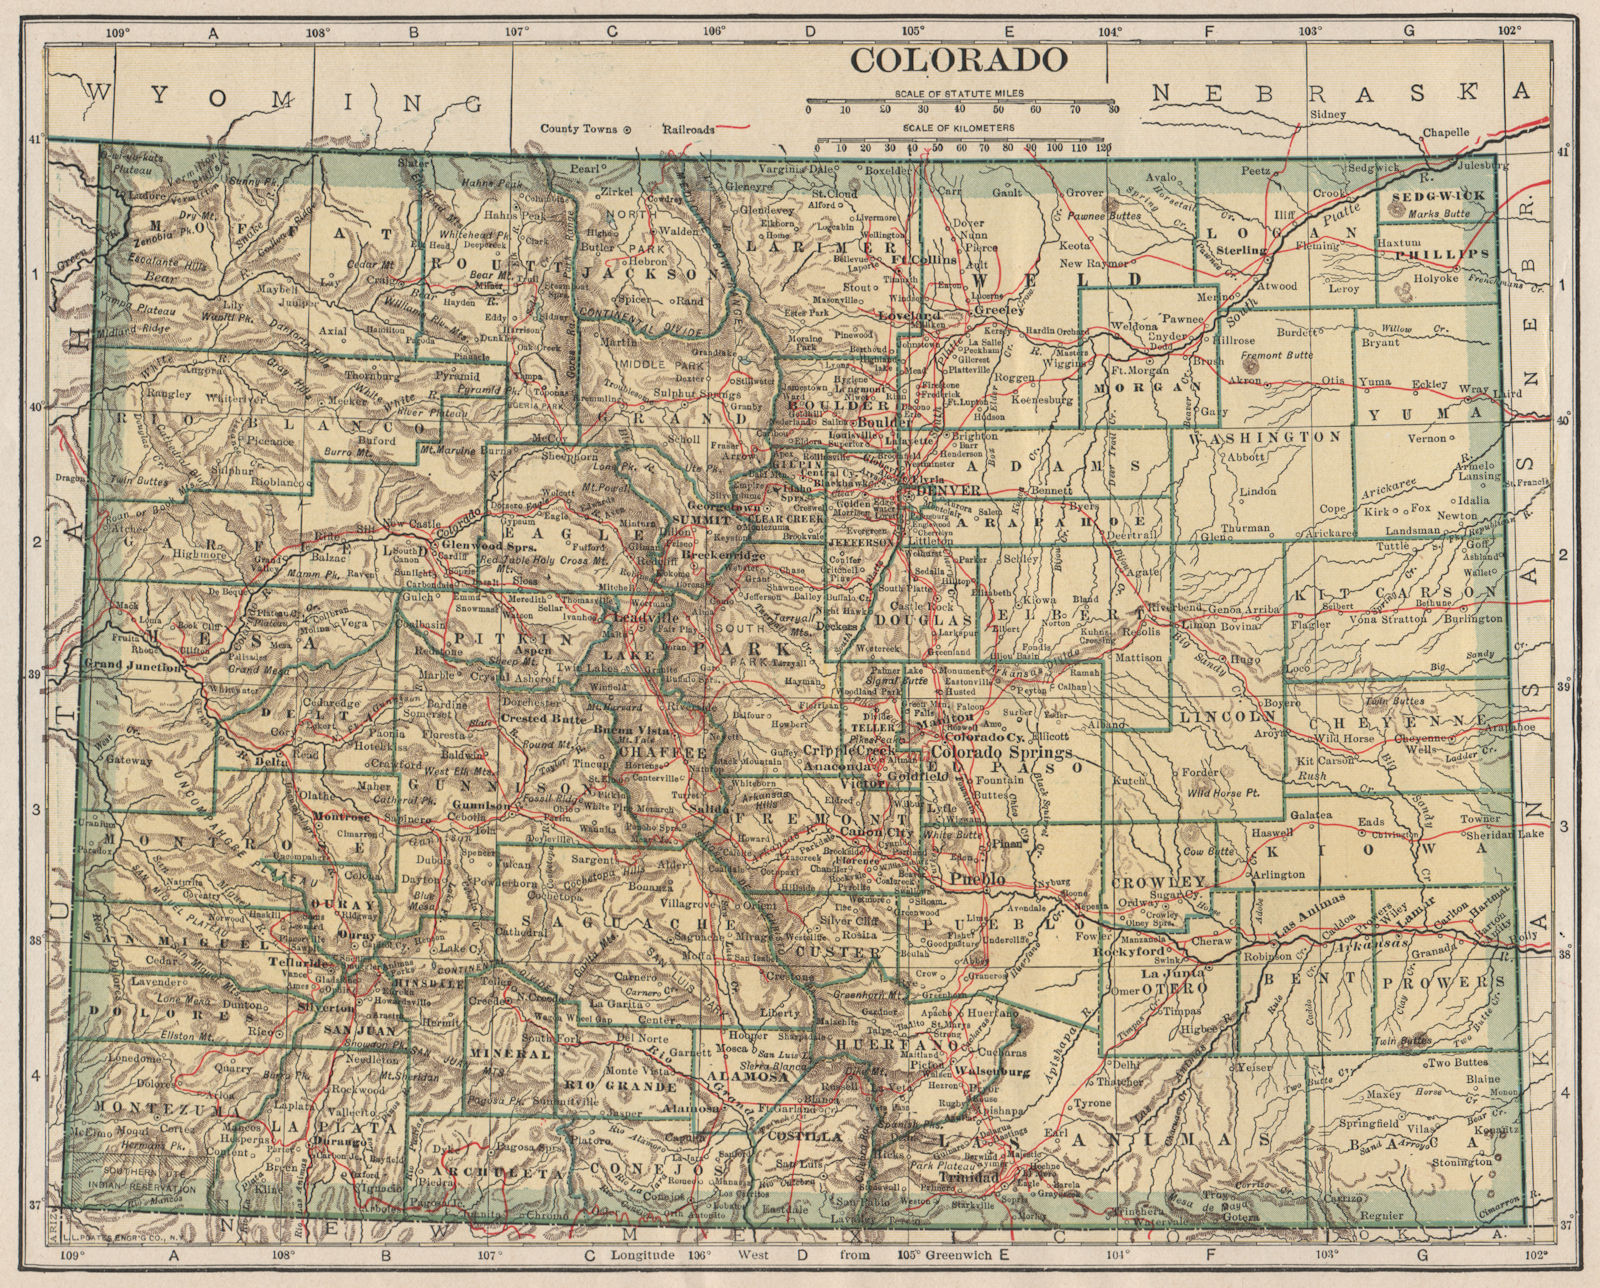 Colorado state map showing railroads. POATES 1925 old vintage plan chart